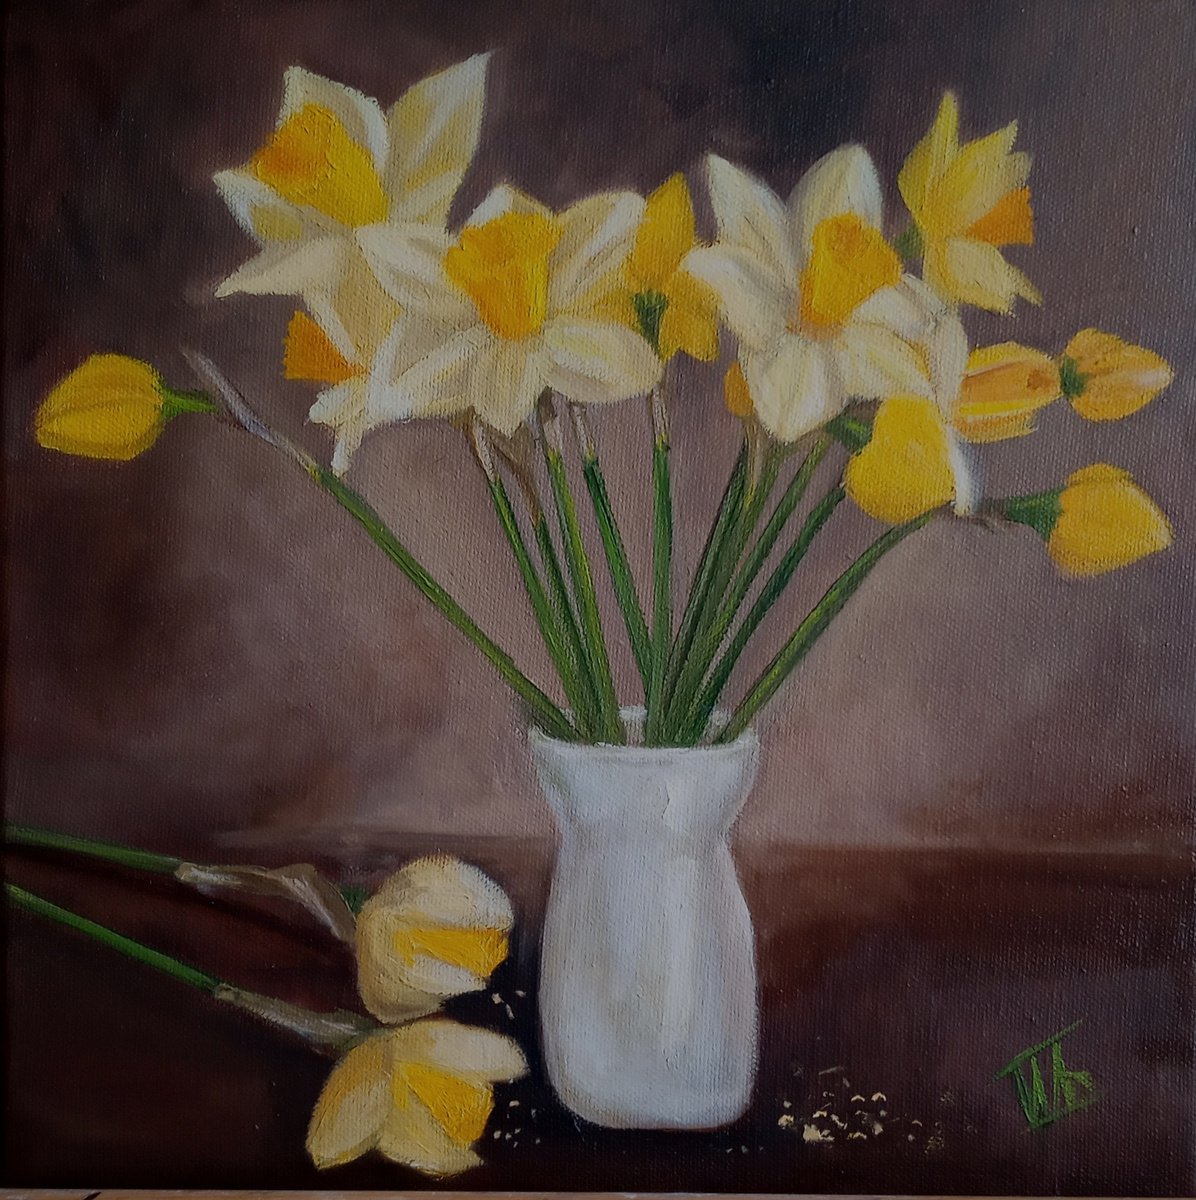 Daffodils in a vase by Ira Whittaker